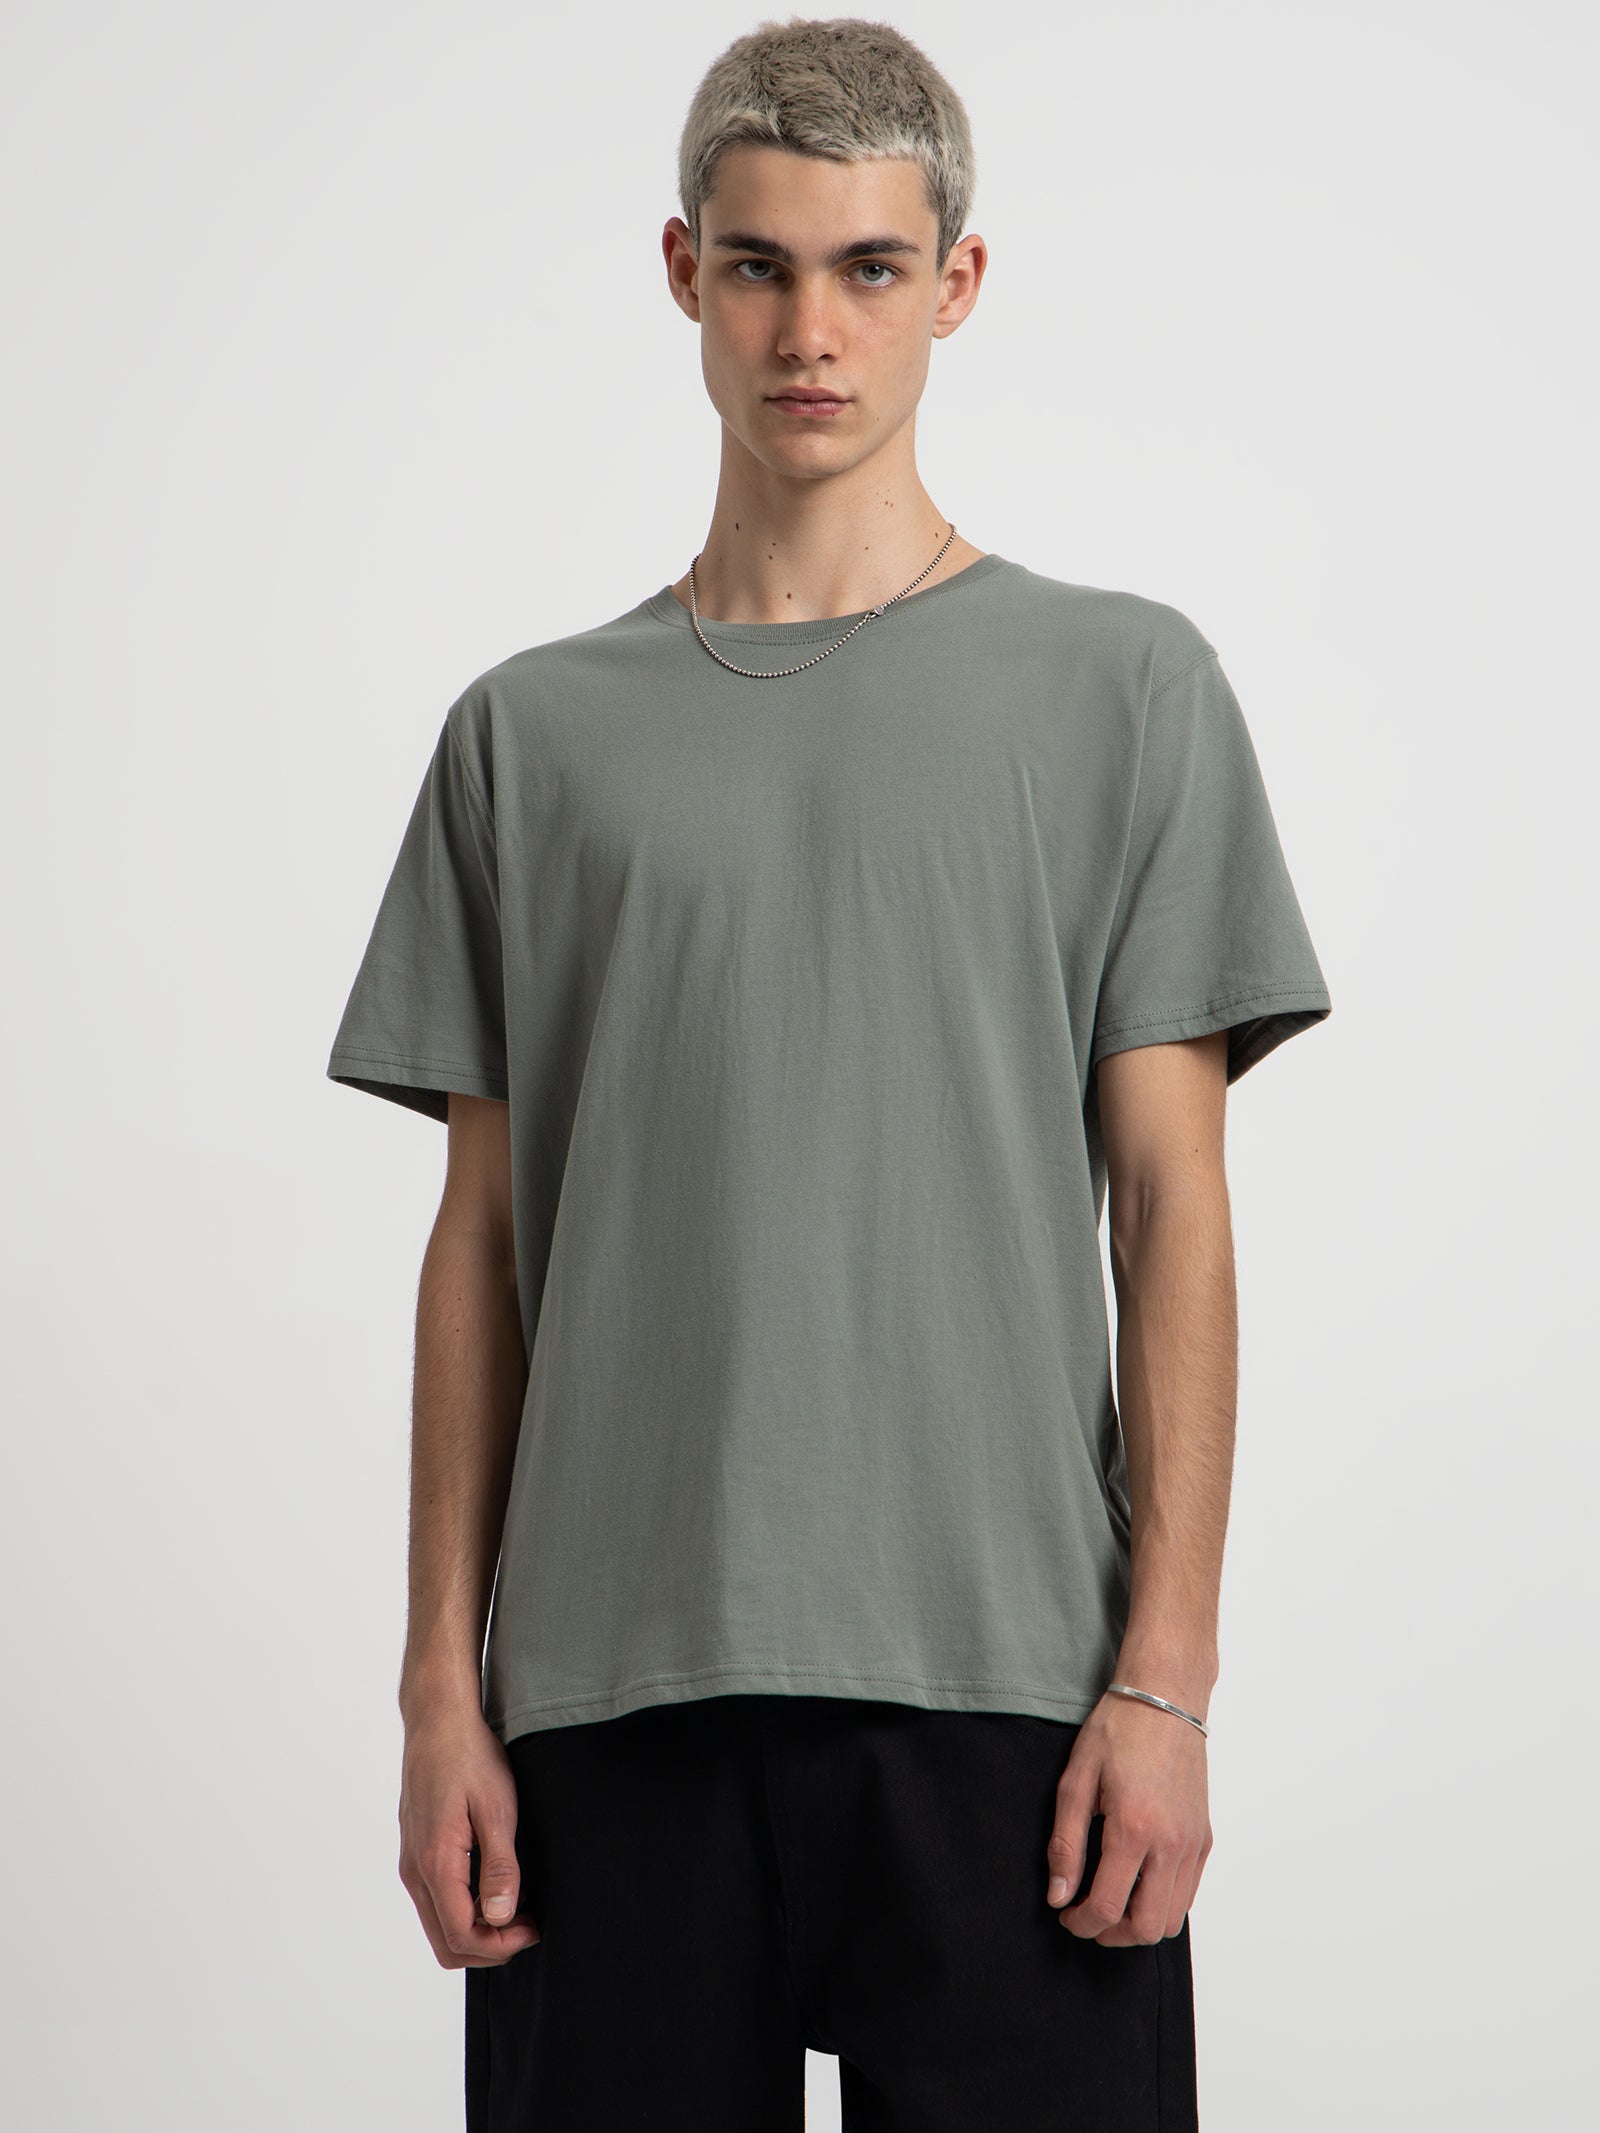 Classic T-Shirt in Sage Green - Glue Store